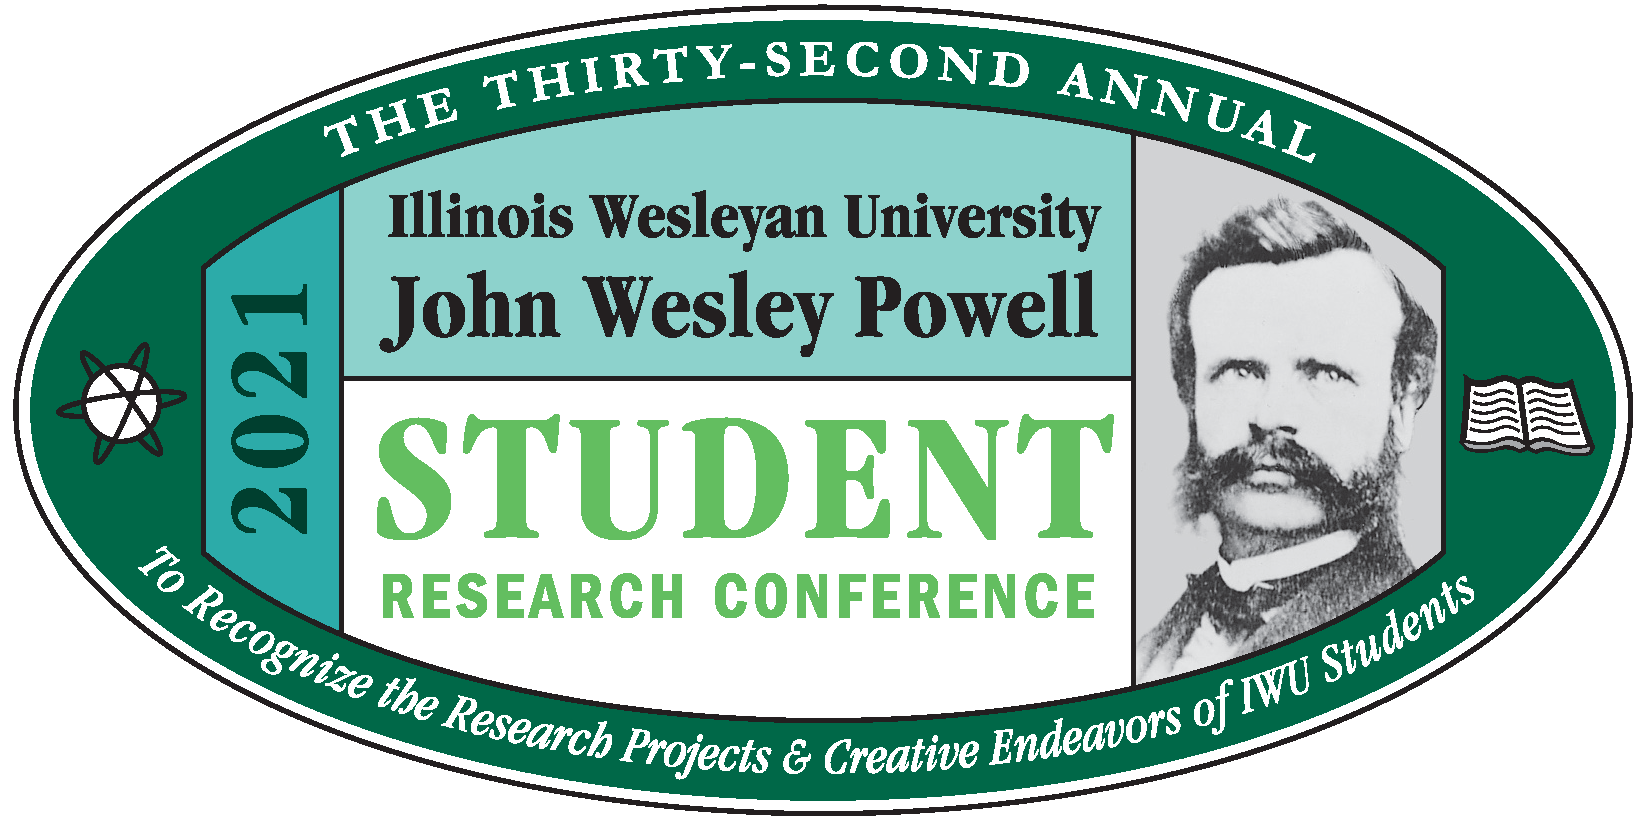 John Wesley Powell Research Conference